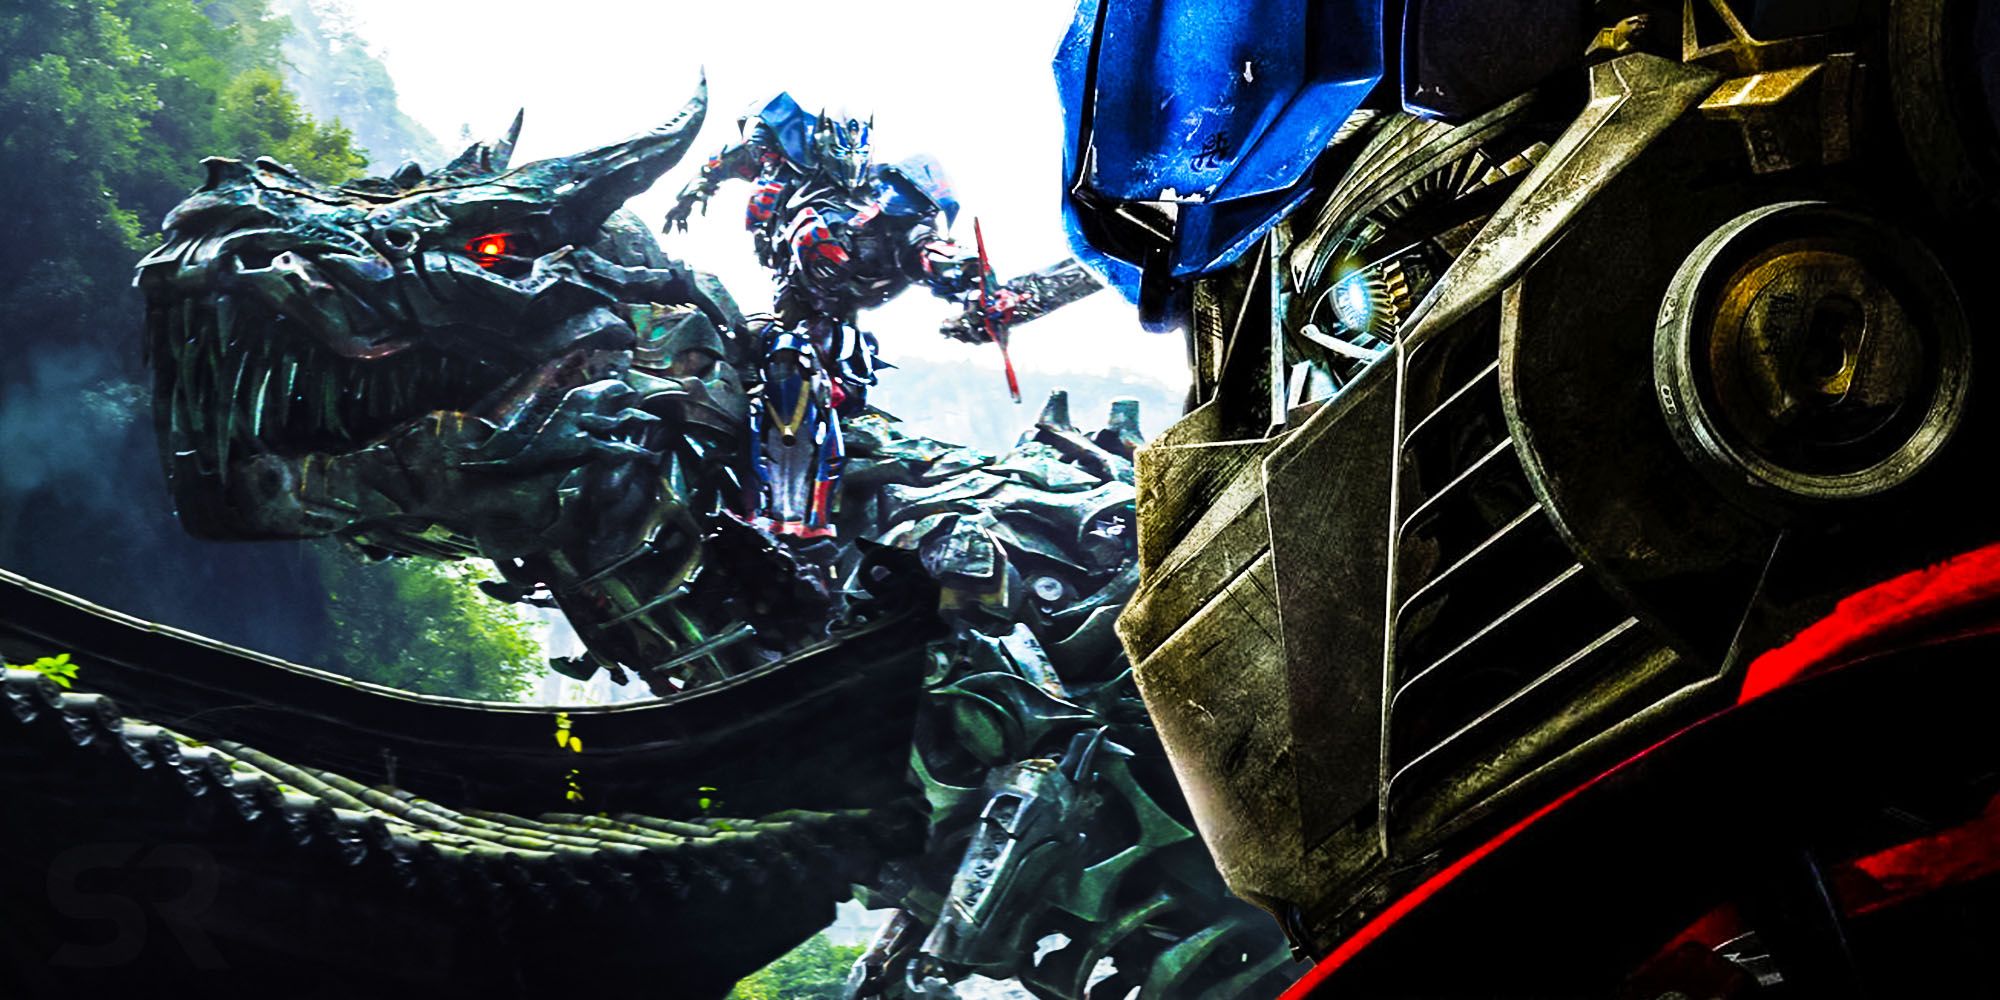 Transformers first movie transformers age of extinction dinobots